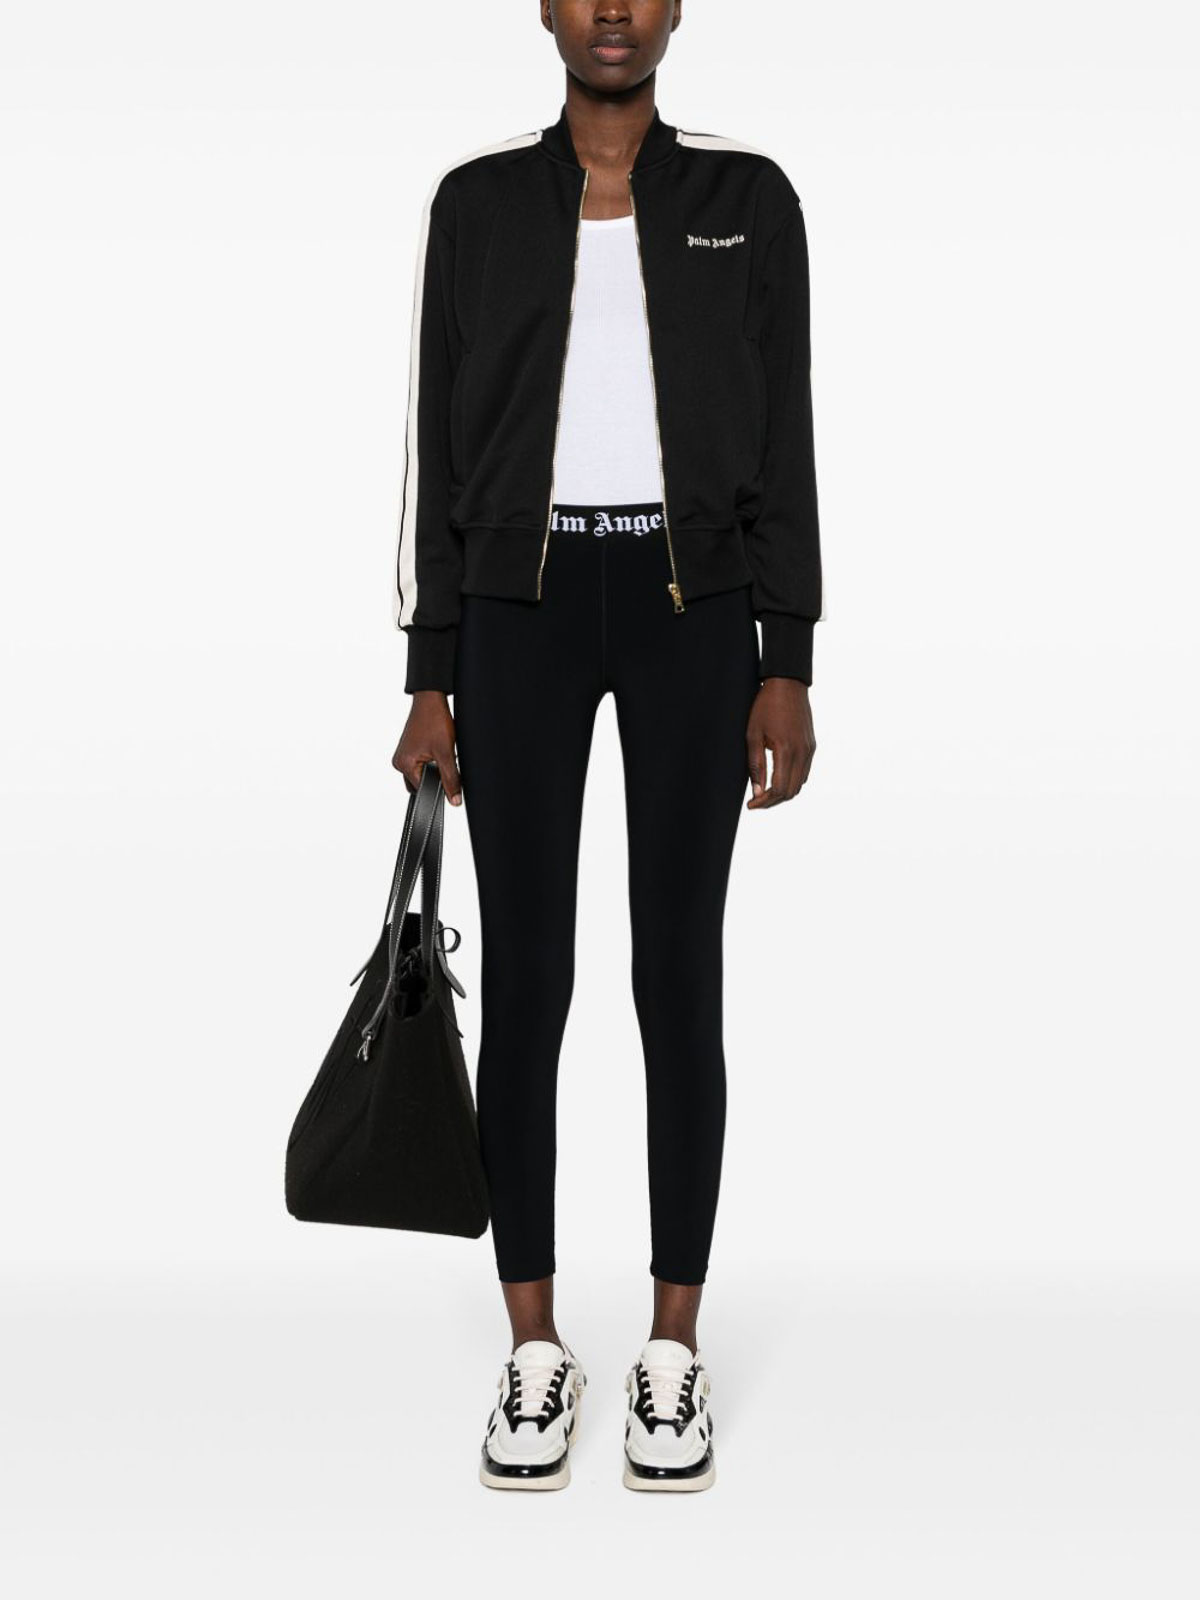 Shop Palm Angels Chaqueta Bomber - Negro In Black